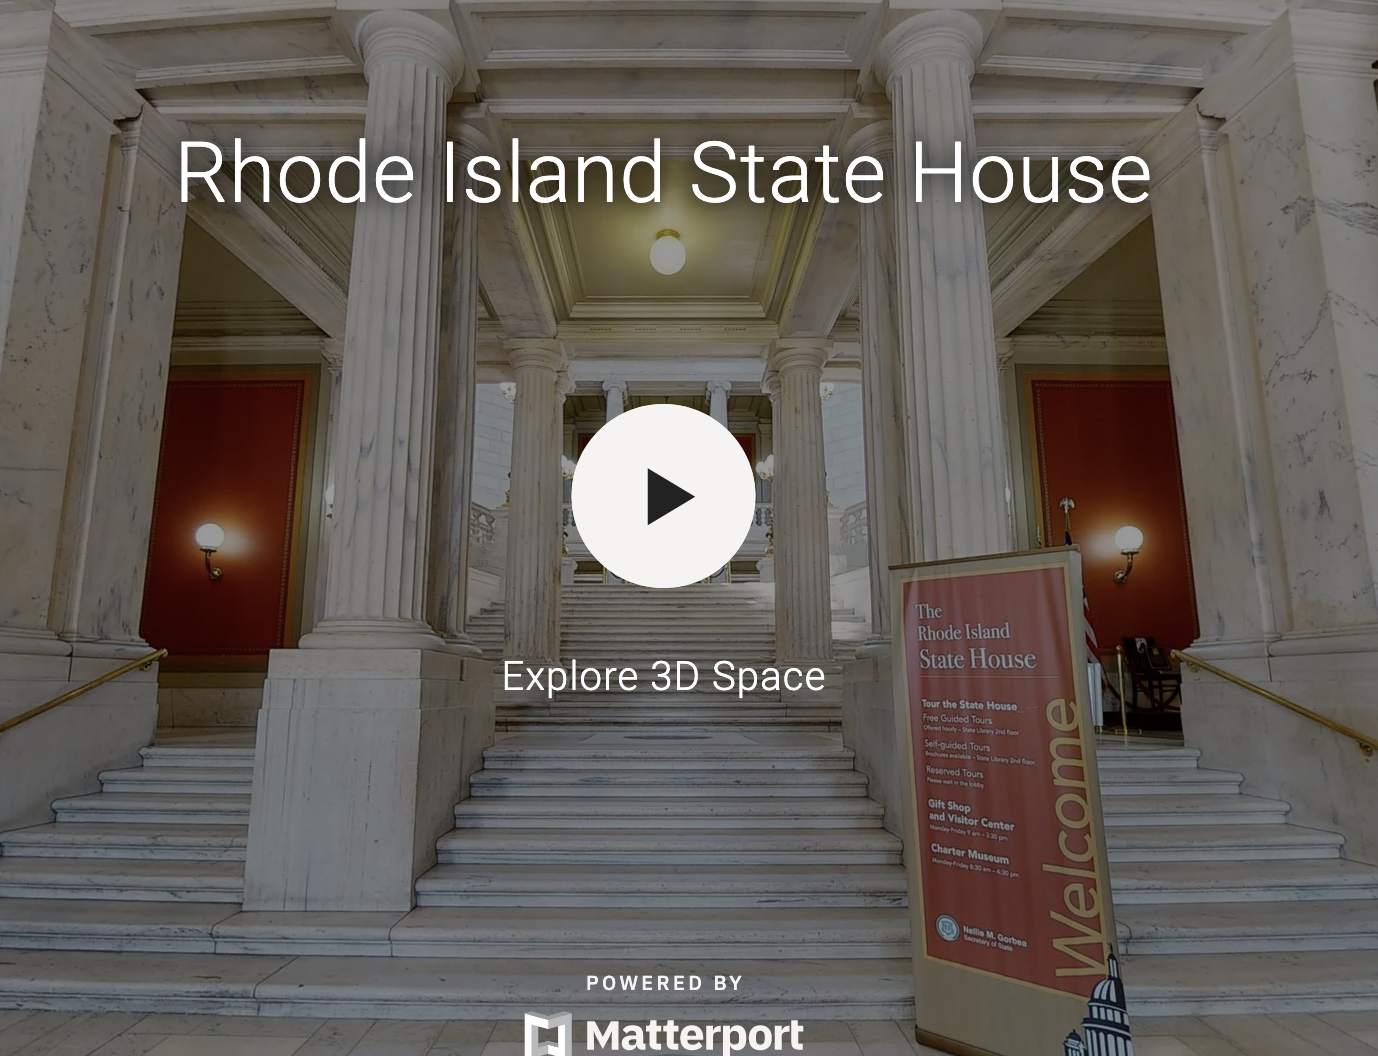 Tour the Rhode Island State House